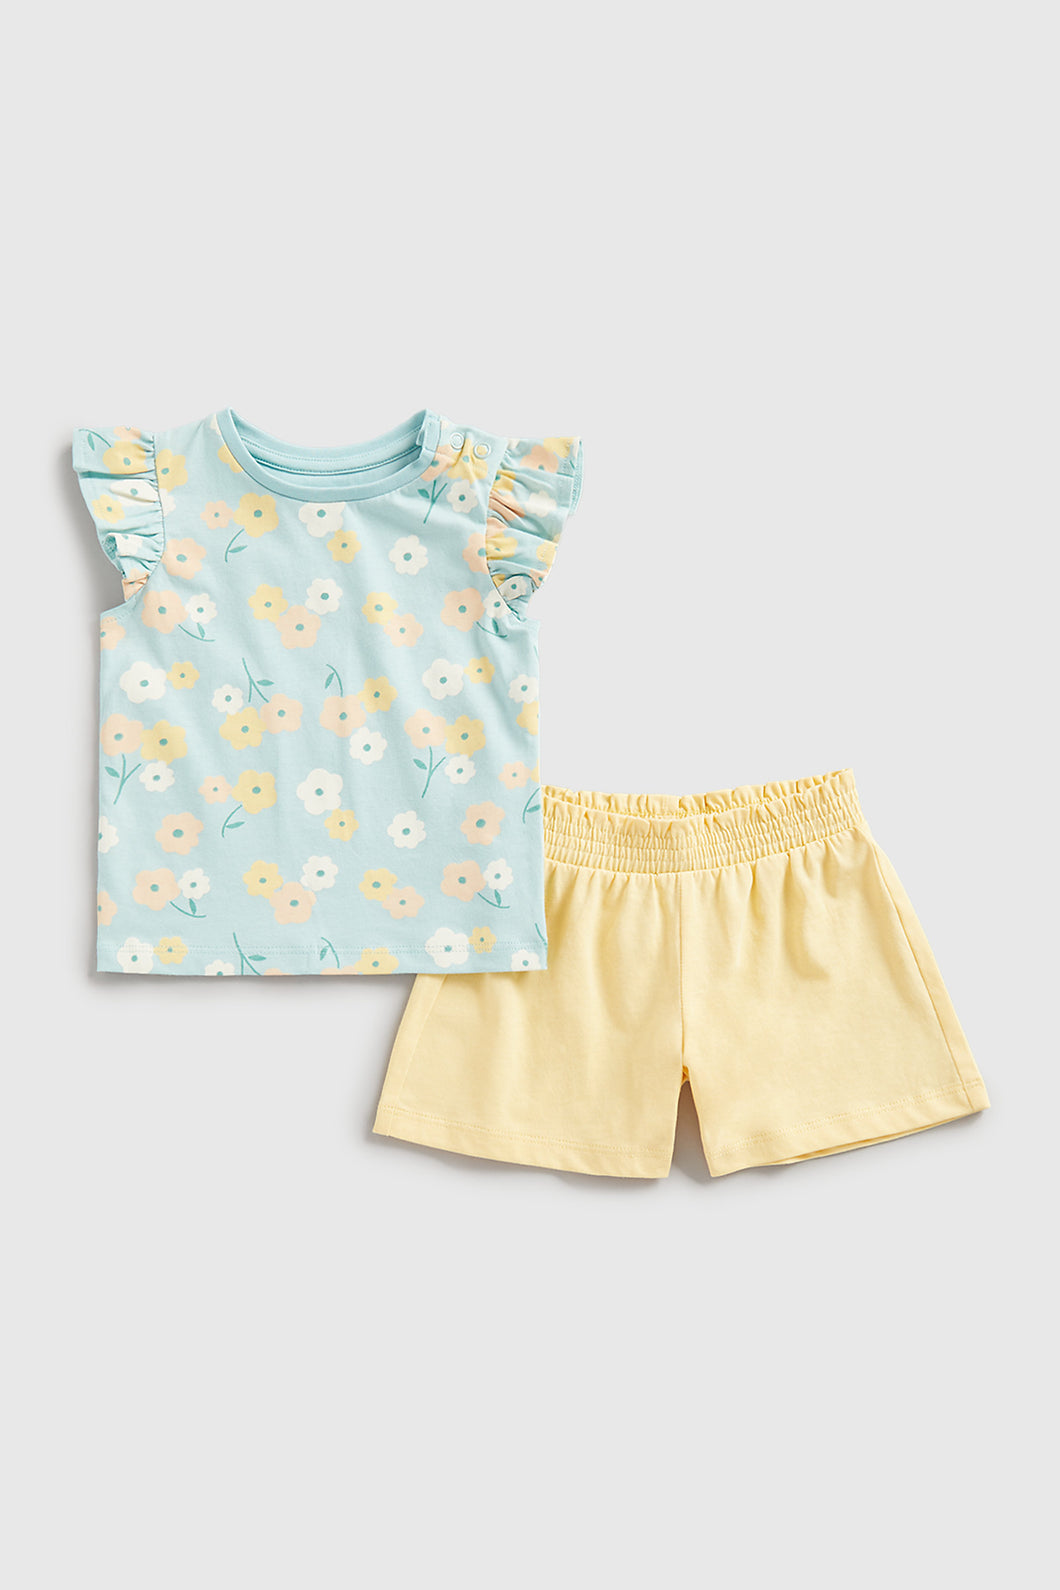 Mothercare Floral Top and Shorts Set